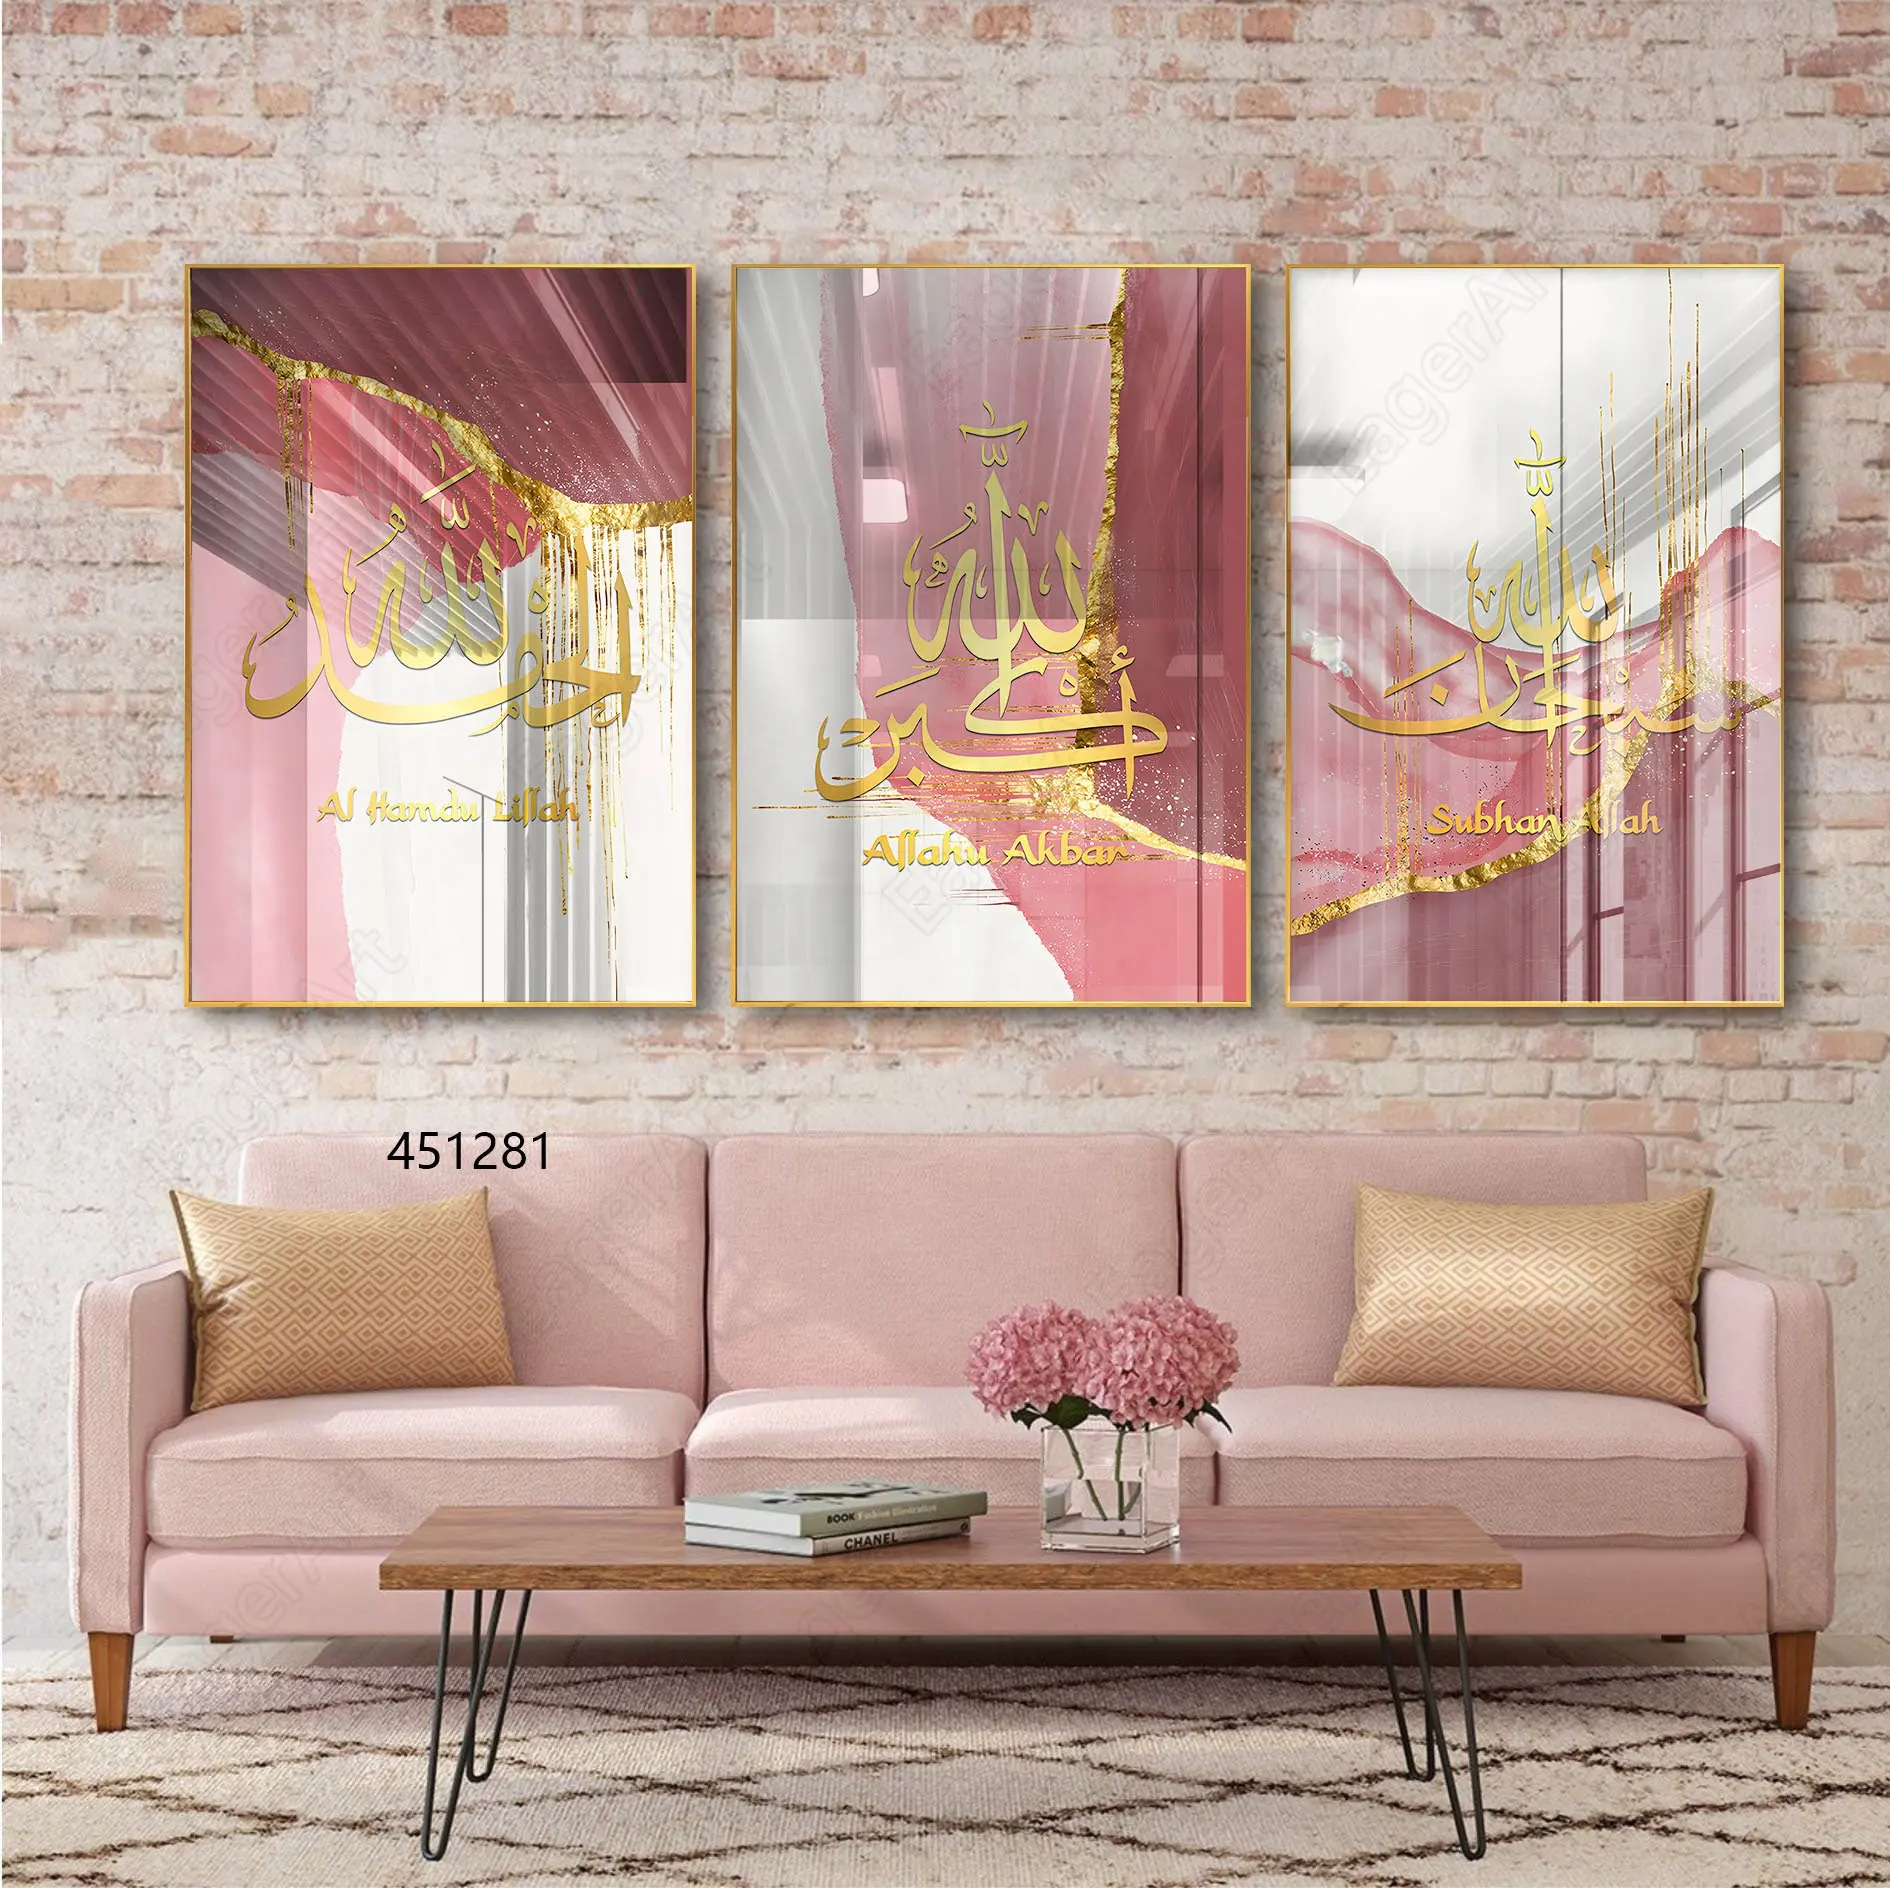 Home Living Room Decor Islamic Calligraphy Pink Pictures Prints Wall Art With Metal Frame 3 Panel Resin Paintings